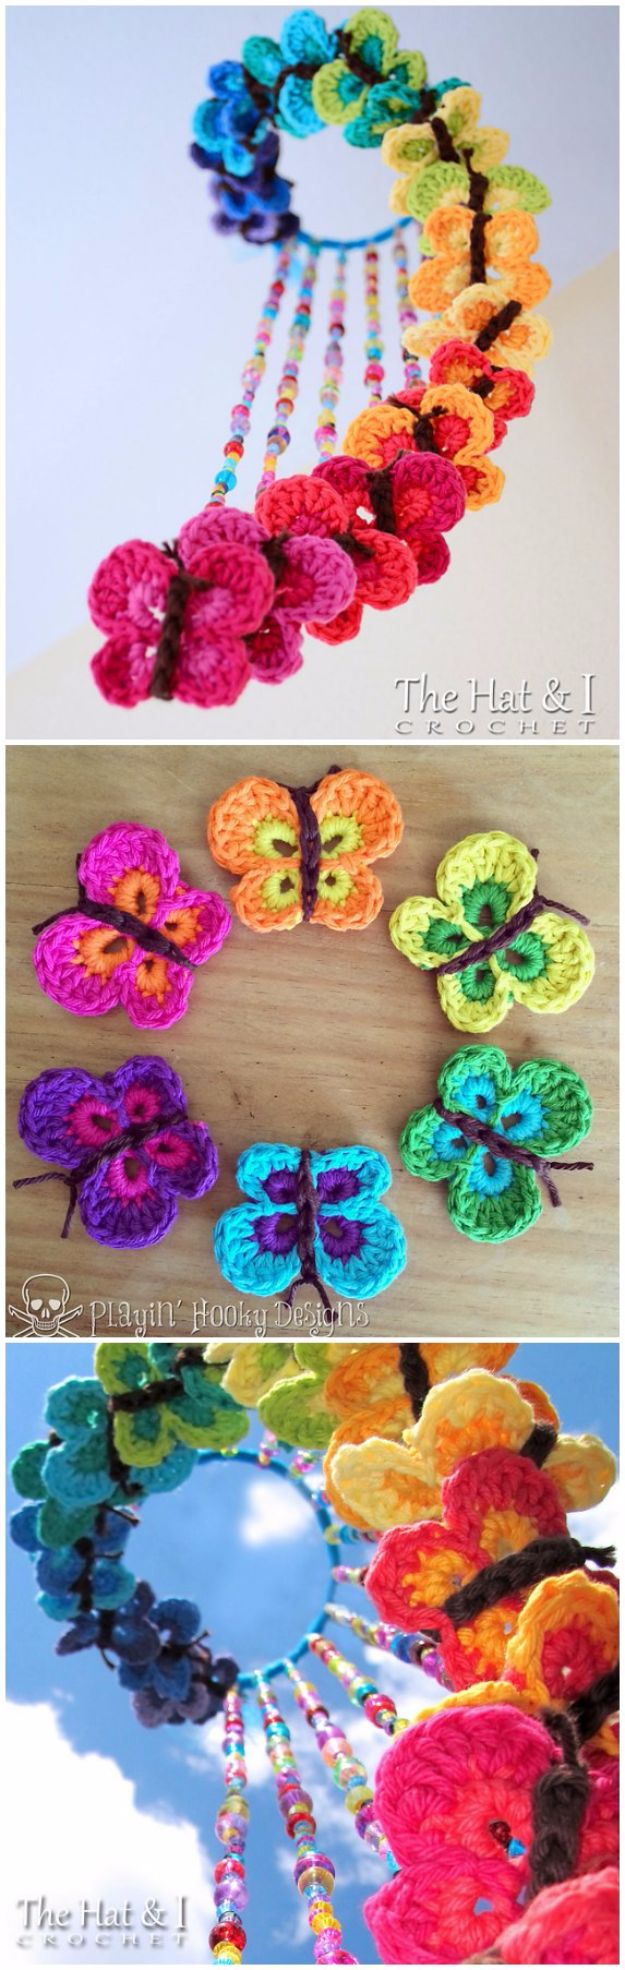 DIY Ideas With Butterflies - Crochet Butterfly Mobile - Cute and Easy DIY Projects for Butterfly Lovers - Wall and Home Decor Projects, Things To Make and Sell on Etsy - Quick Gifts to Make for Friends and Family - Homemade No Sew Projects- Fun Jewelry, Cool Clothes and Accessories #diyideas #butterflies #teencrafts